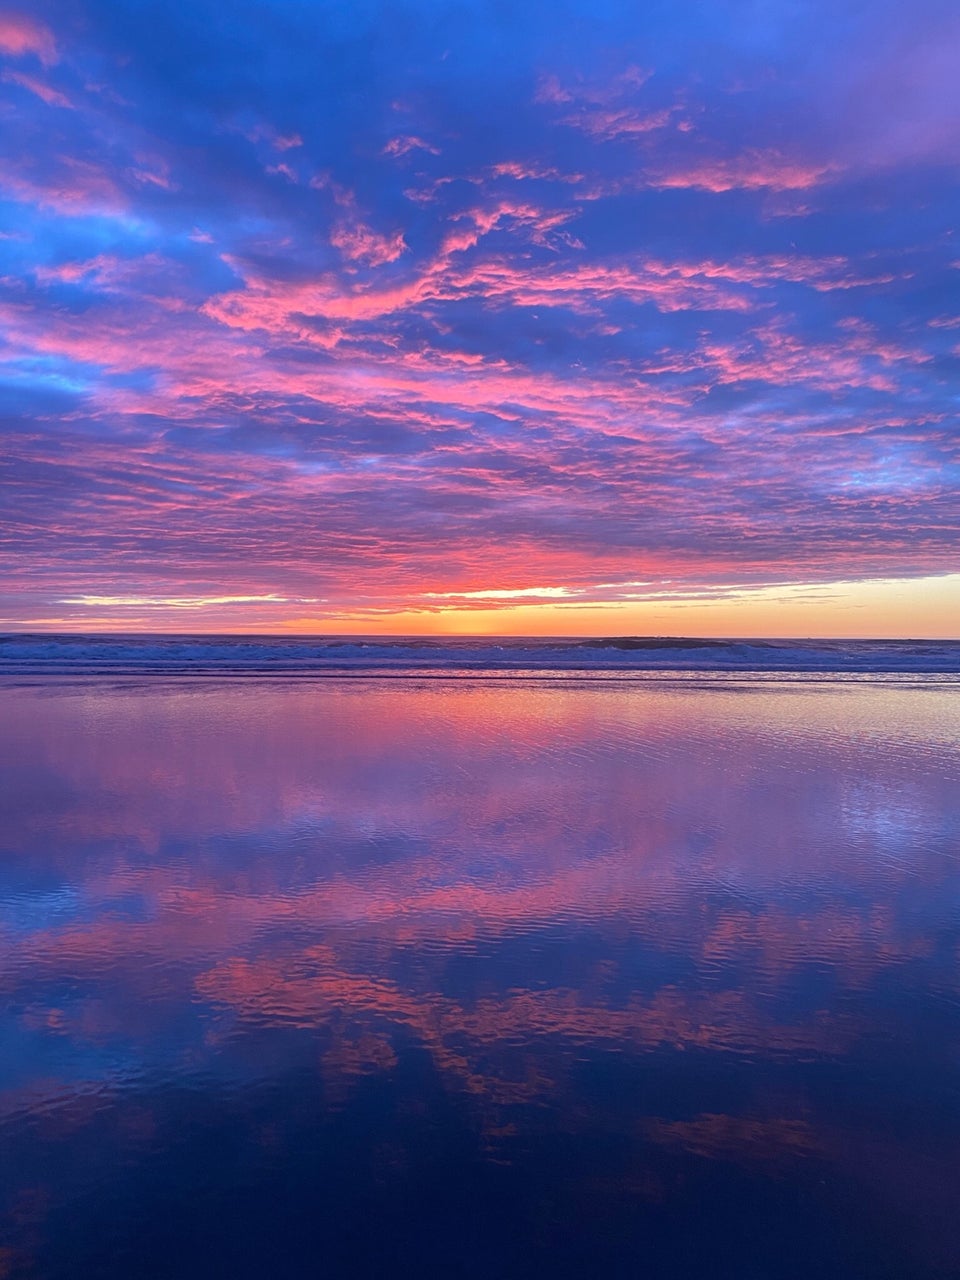 Blue, purple, pink clouds lighting up a post-sunset sky above an orange yellow horizon and distant Pacific Ocean waves crashing on a shore, wet sand in the foreground reflecting the beautiful sky.